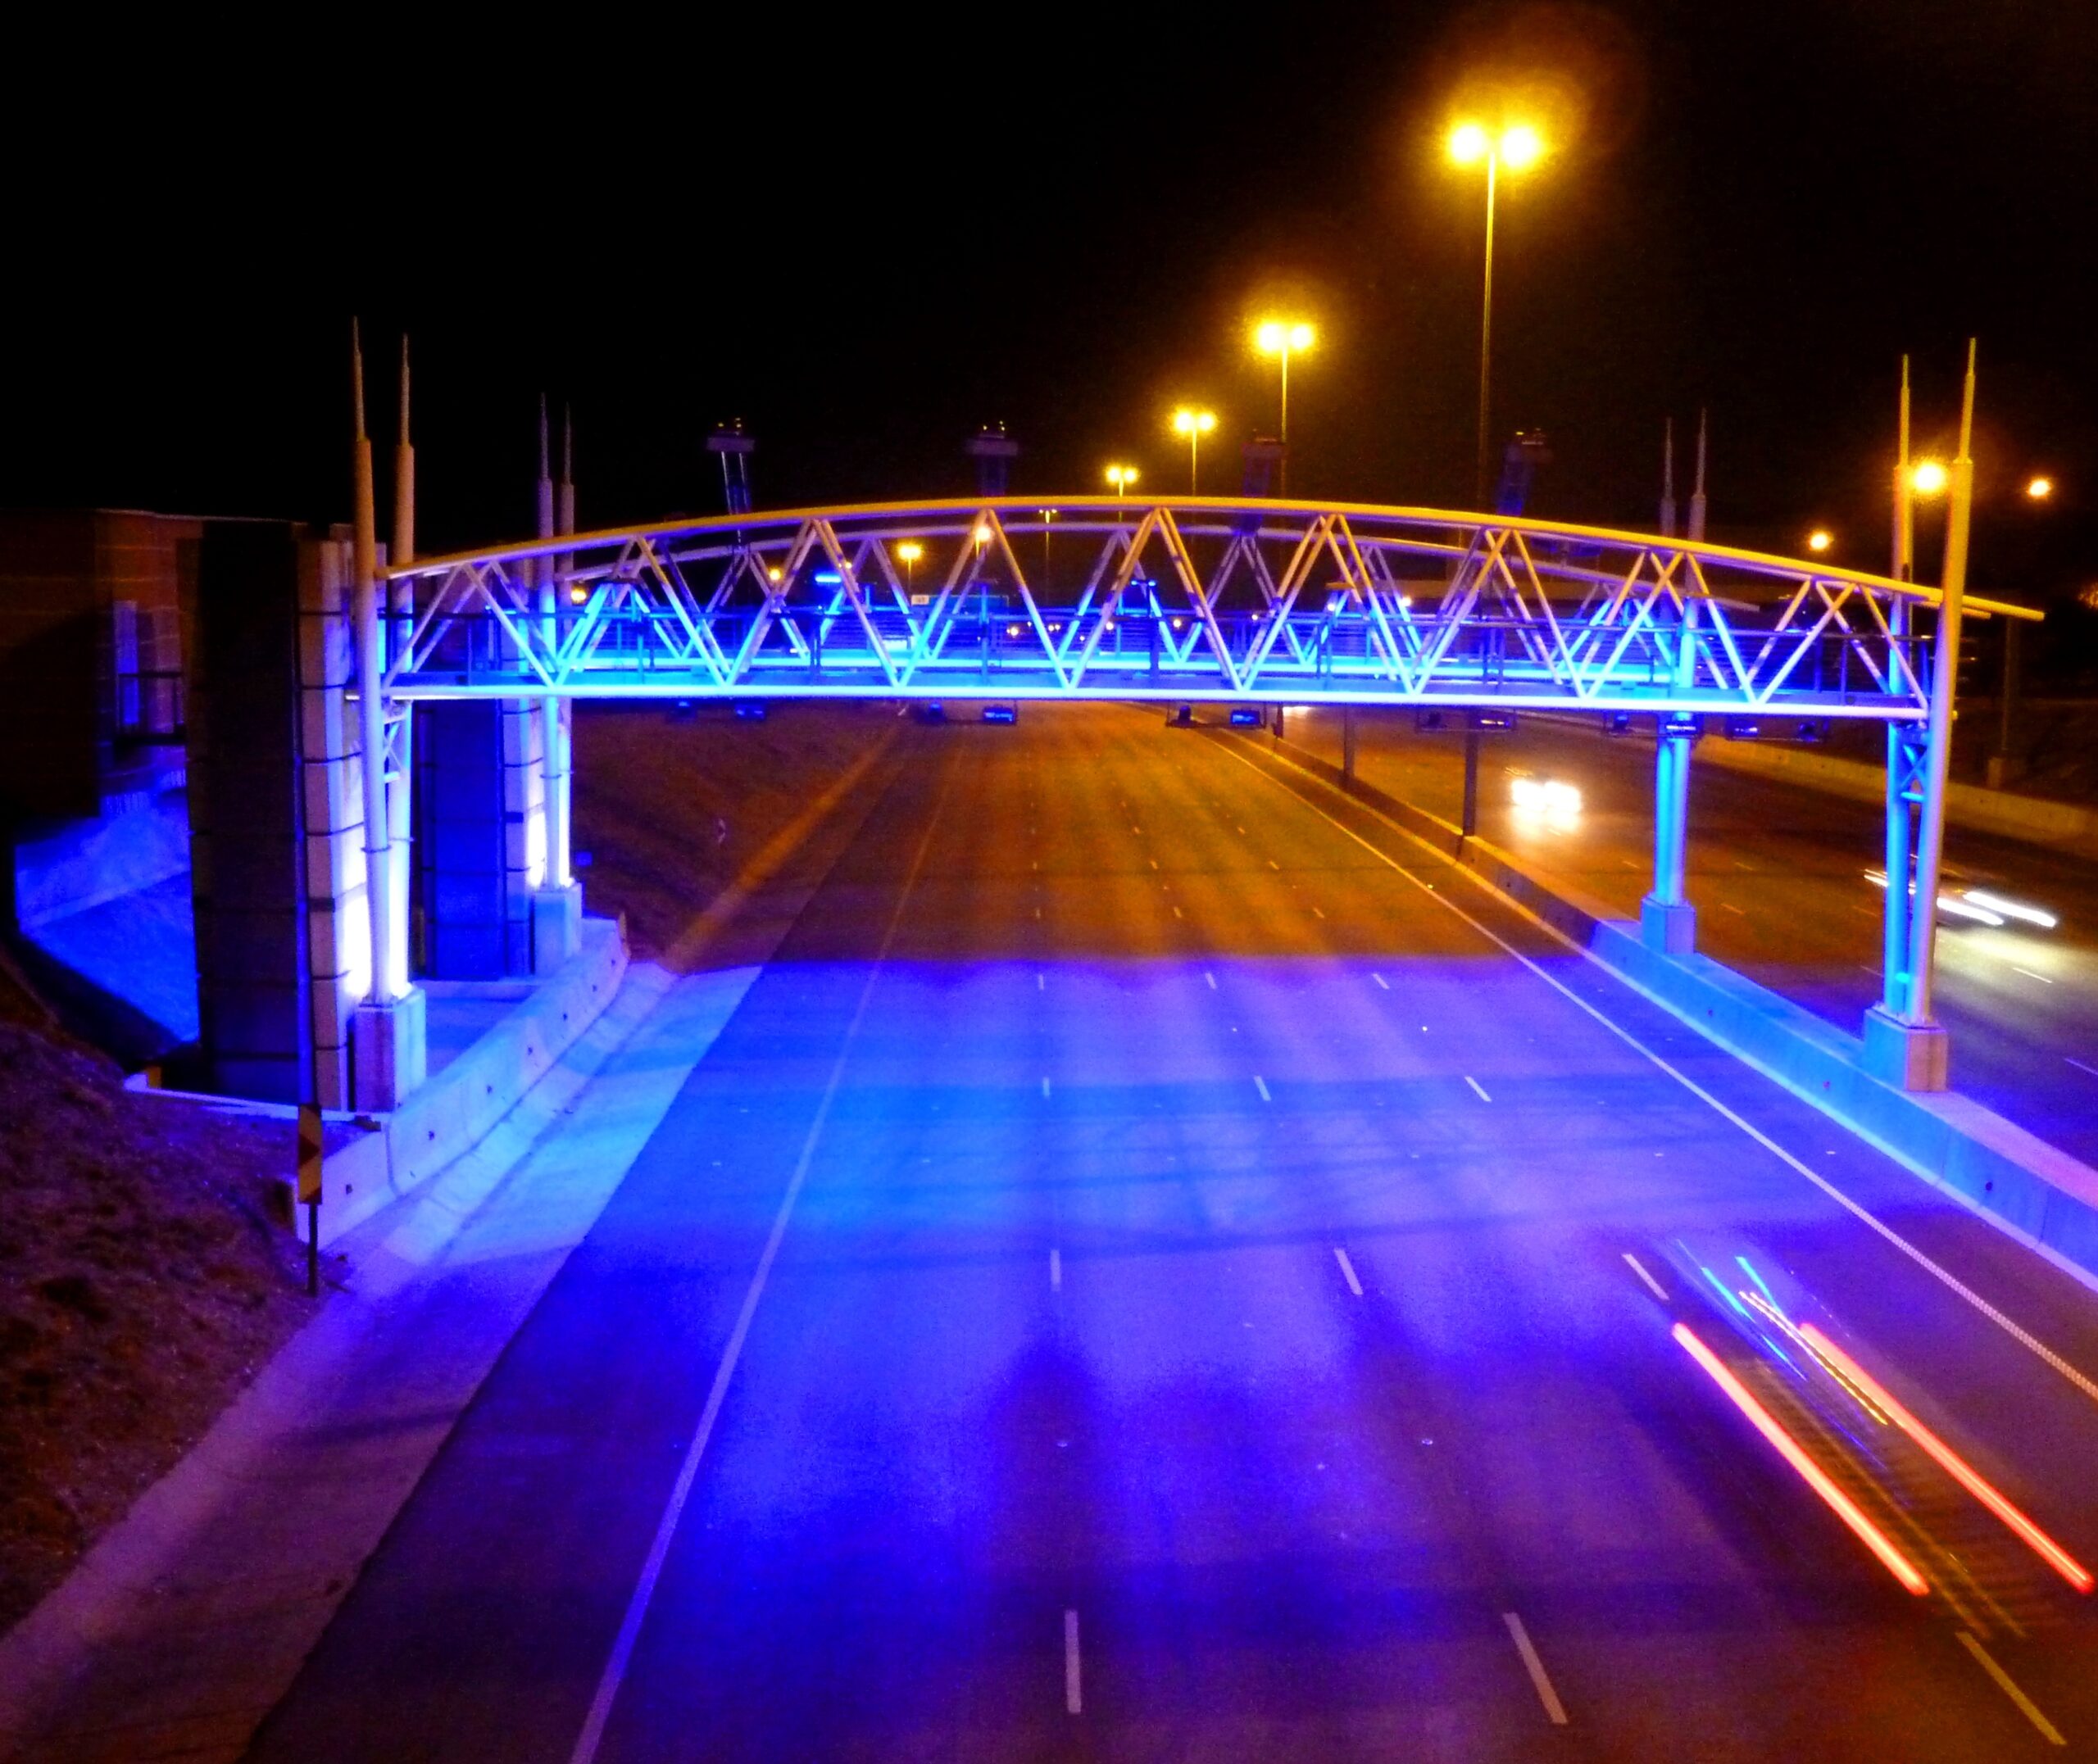 E-tolls are finished